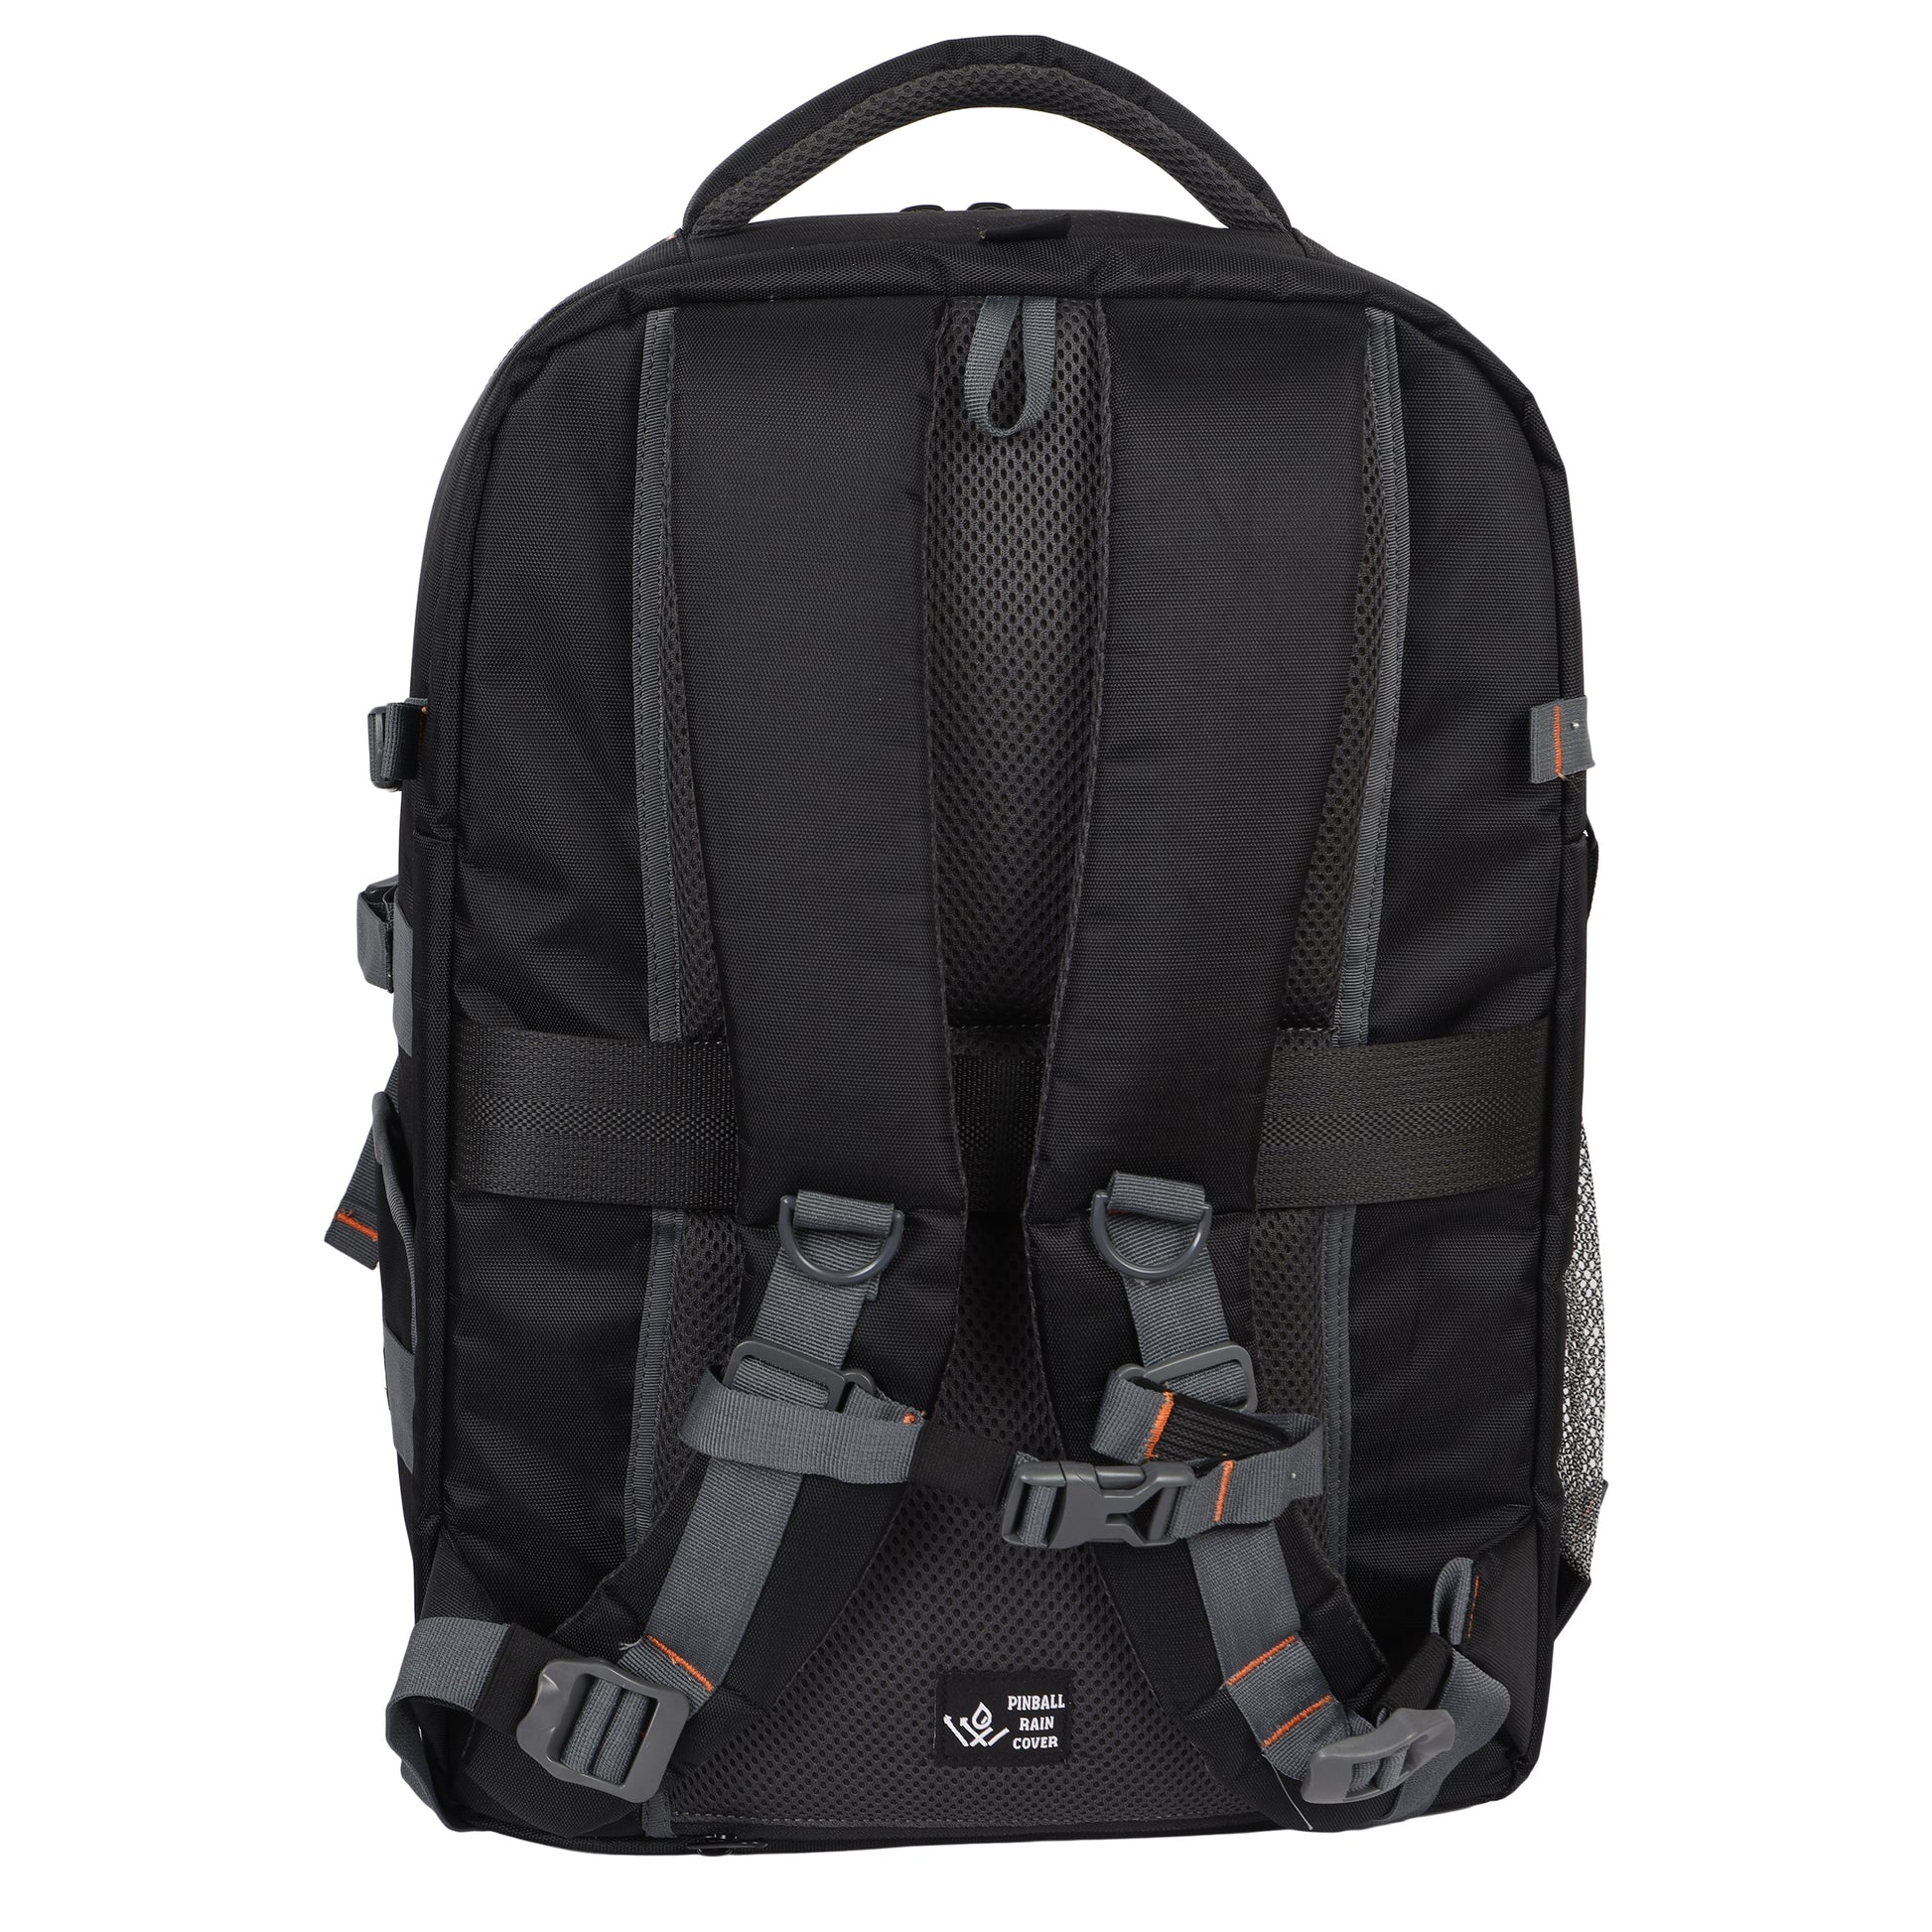 Image: Back view of the G15 Victory Pro DSLR camera bag, featuring padded shoulder straps and a breathable mesh back panel for exceptional comfort during long photography sessions. The ergonomic design and adjustable features ensure a customized fit, reducing strain and fatigue. The bag's sturdy construction and waterproof design offer reliable protection for your valuable camera equipment.